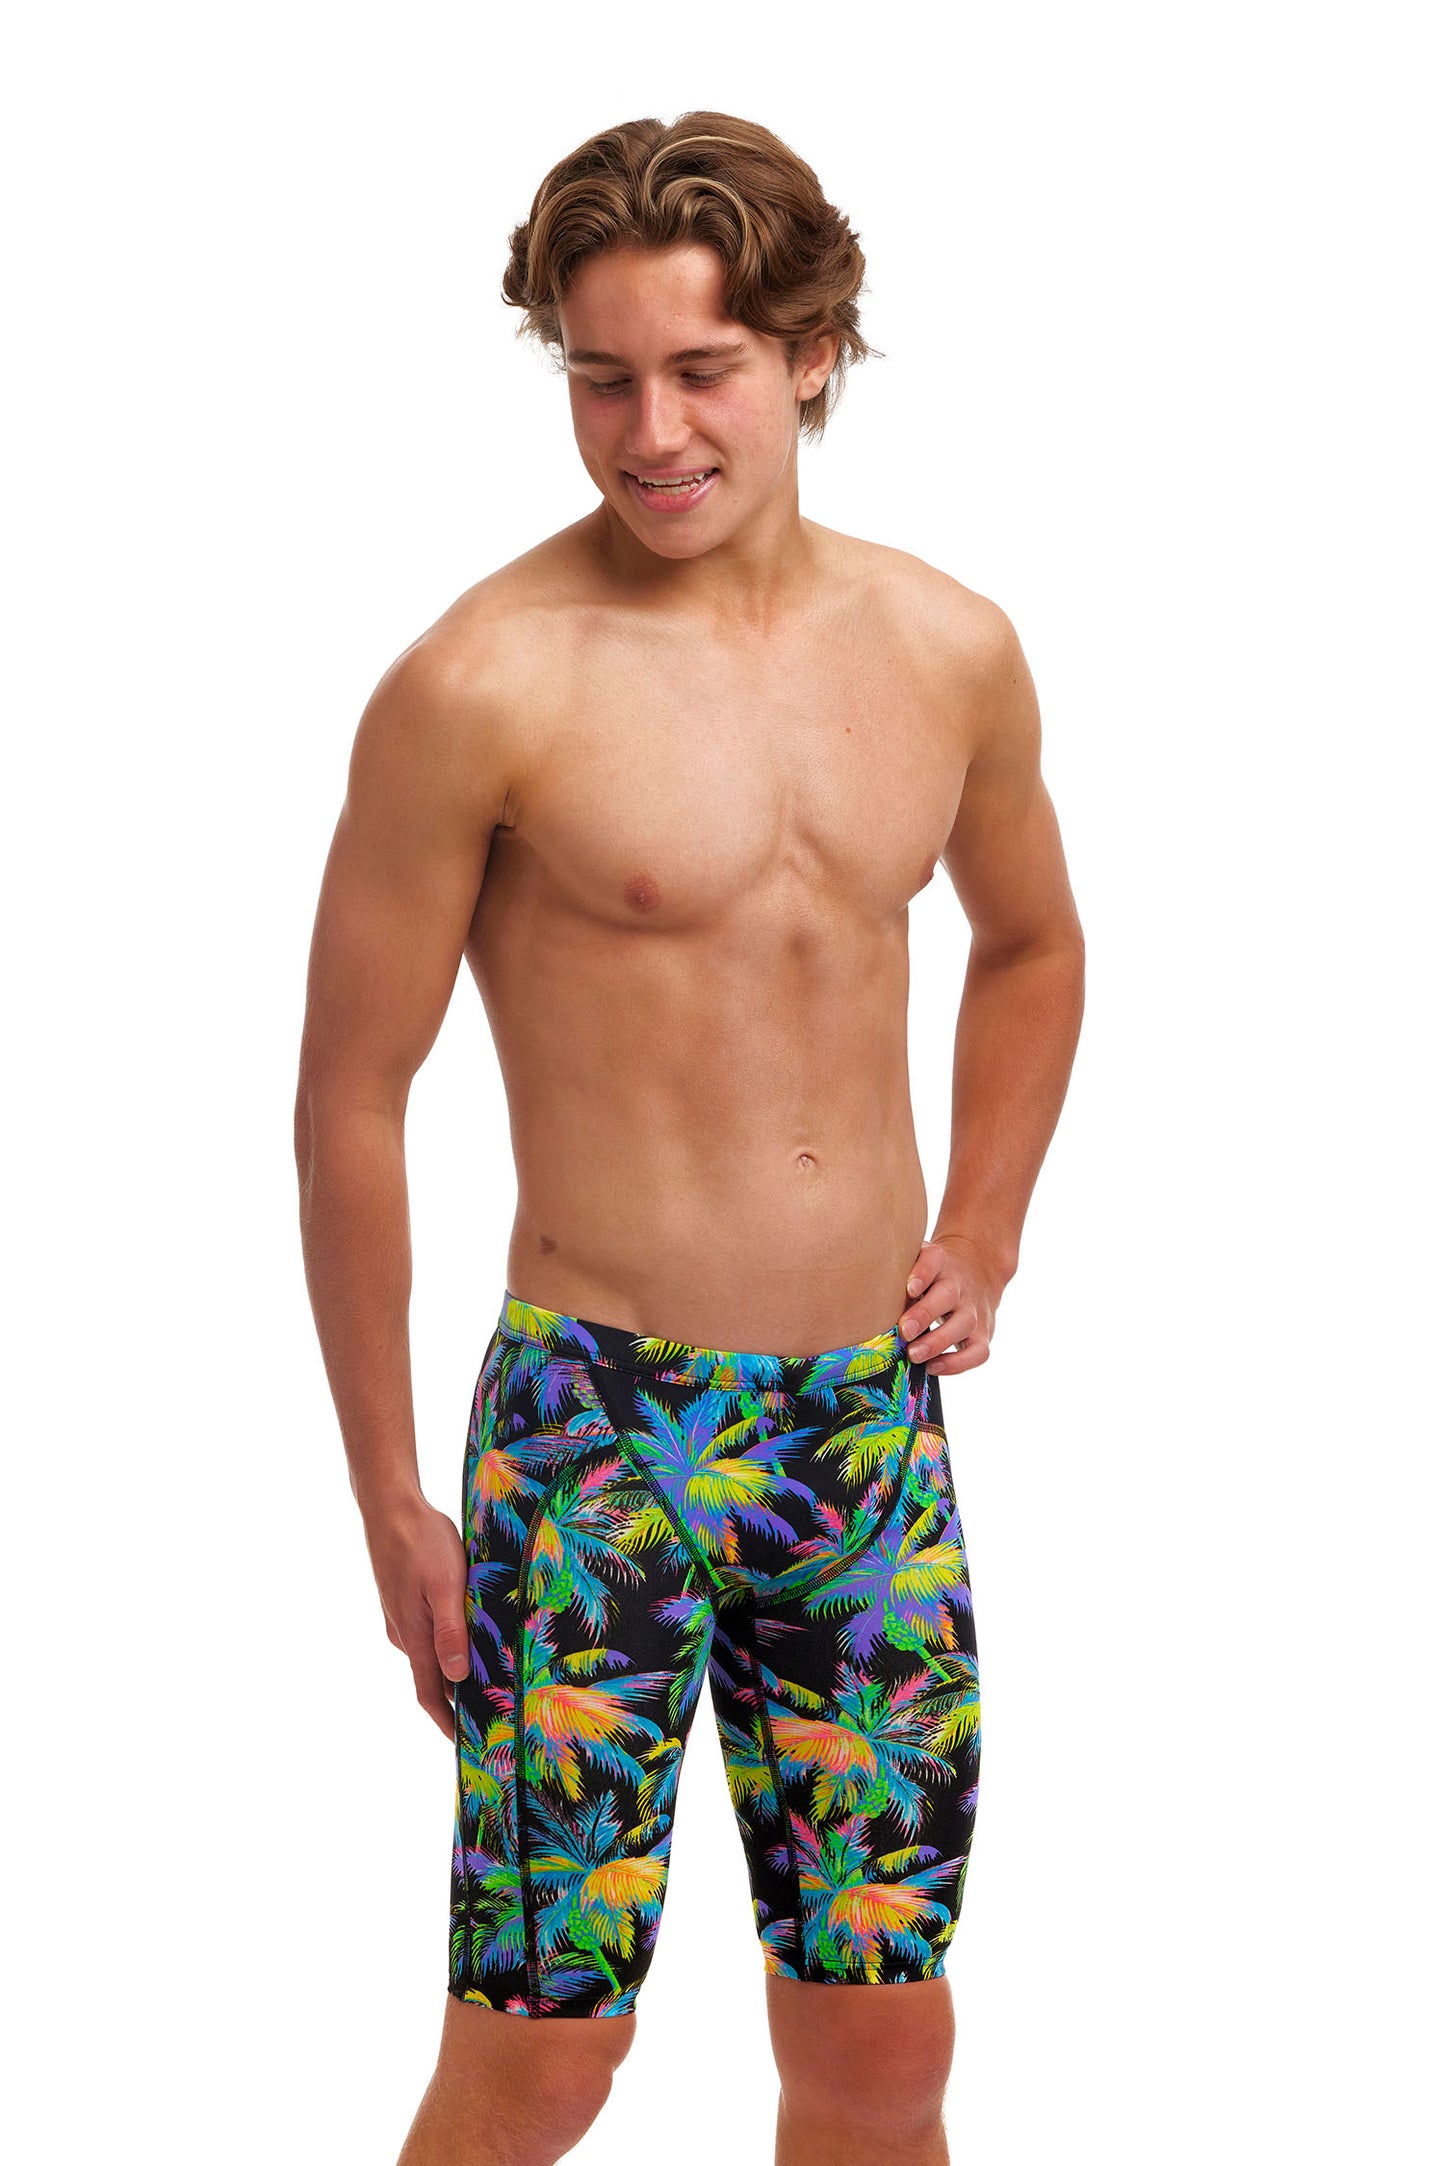 NEW! Funky Trunks Boys Eco Training Jammers Paradise Please